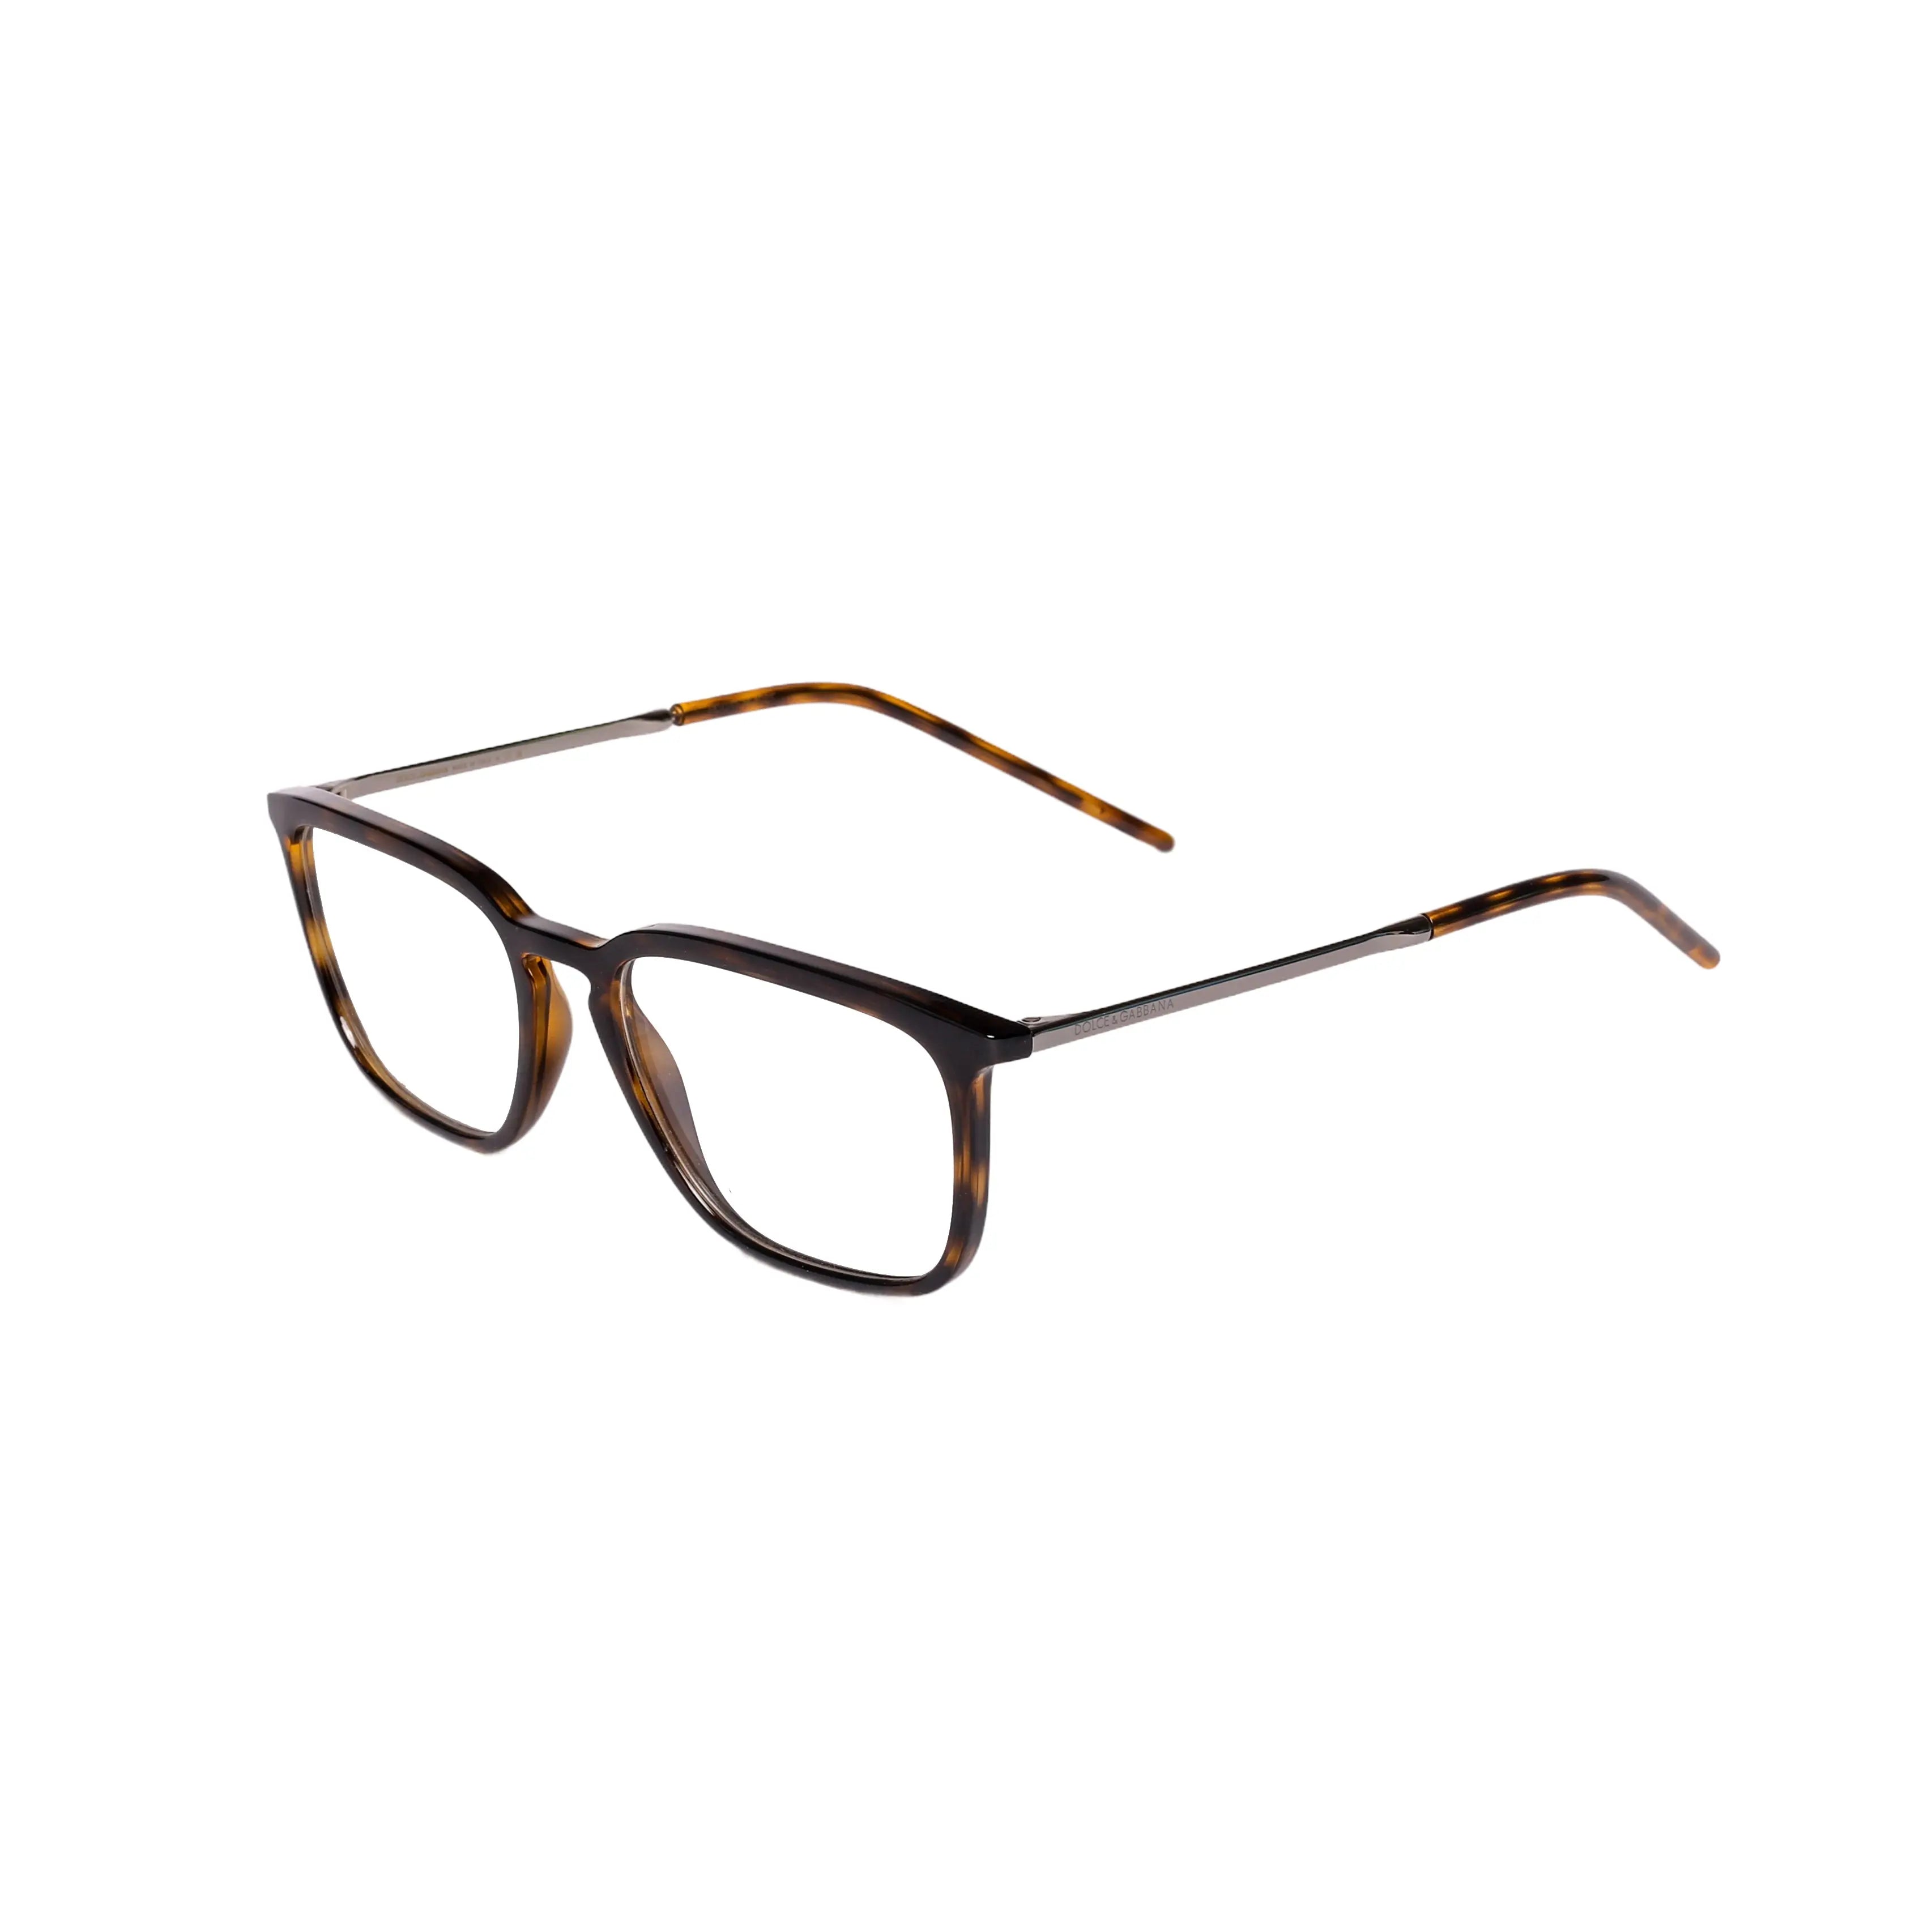 Dolce & Gabbana (D&G) DG 5098-54-502 EyeglassesBring a touch of Italian luxury into your daily look with Dolce &amp; Gabbana's DG 5098-54-502 Eyeglasses! Crafted from ultra-premium materials for an unparalleled lEyeglasses